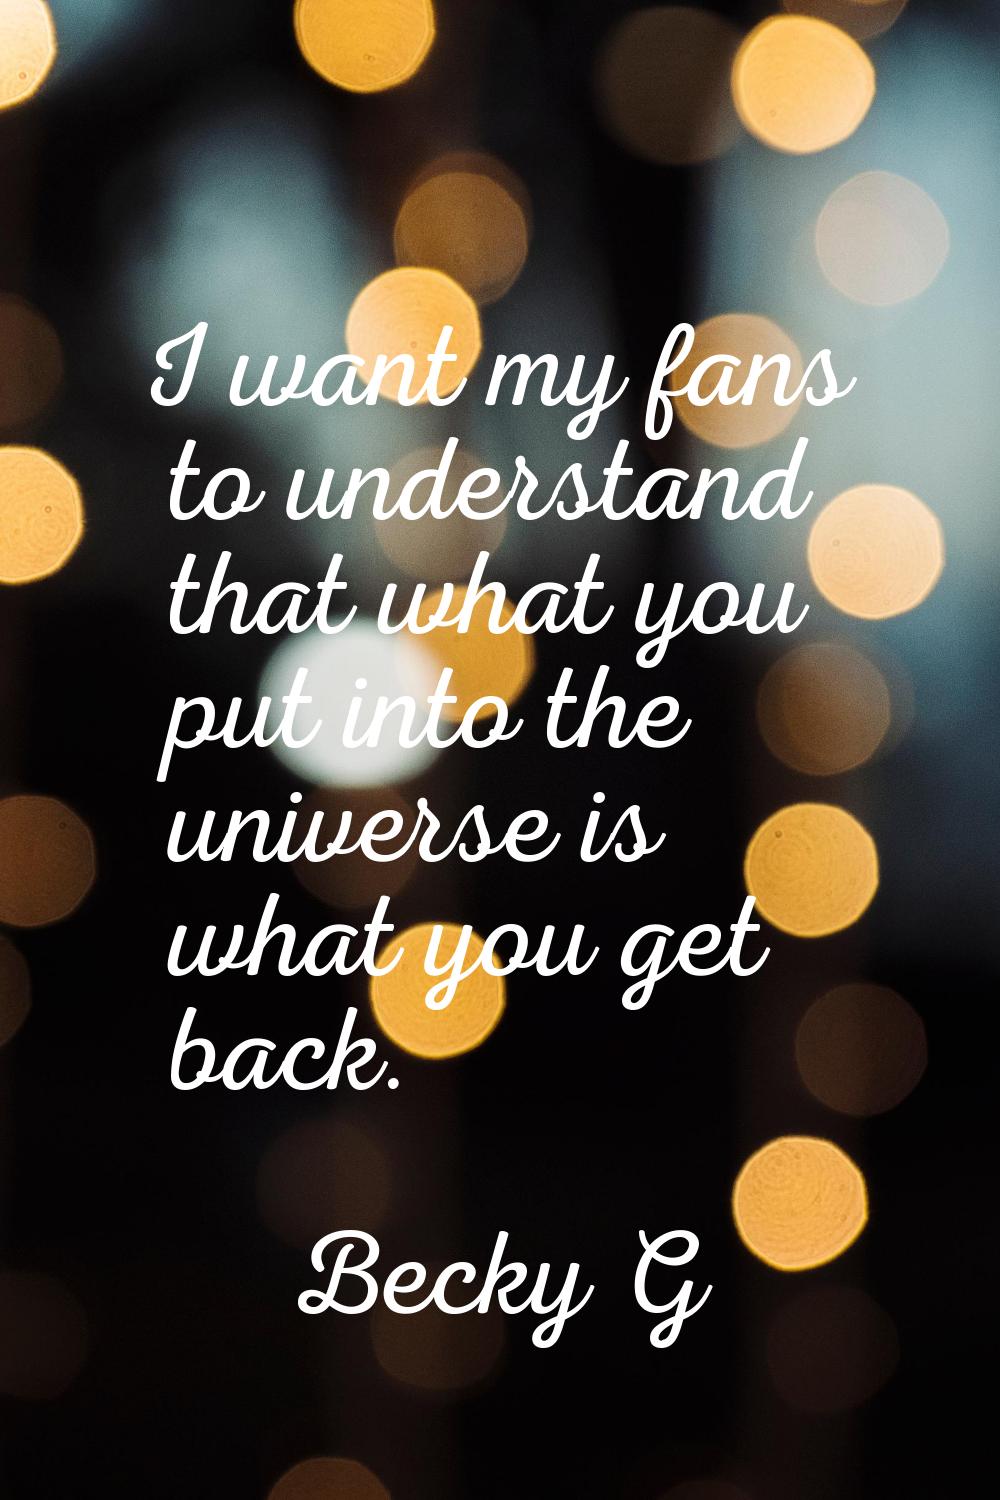 I want my fans to understand that what you put into the universe is what you get back.